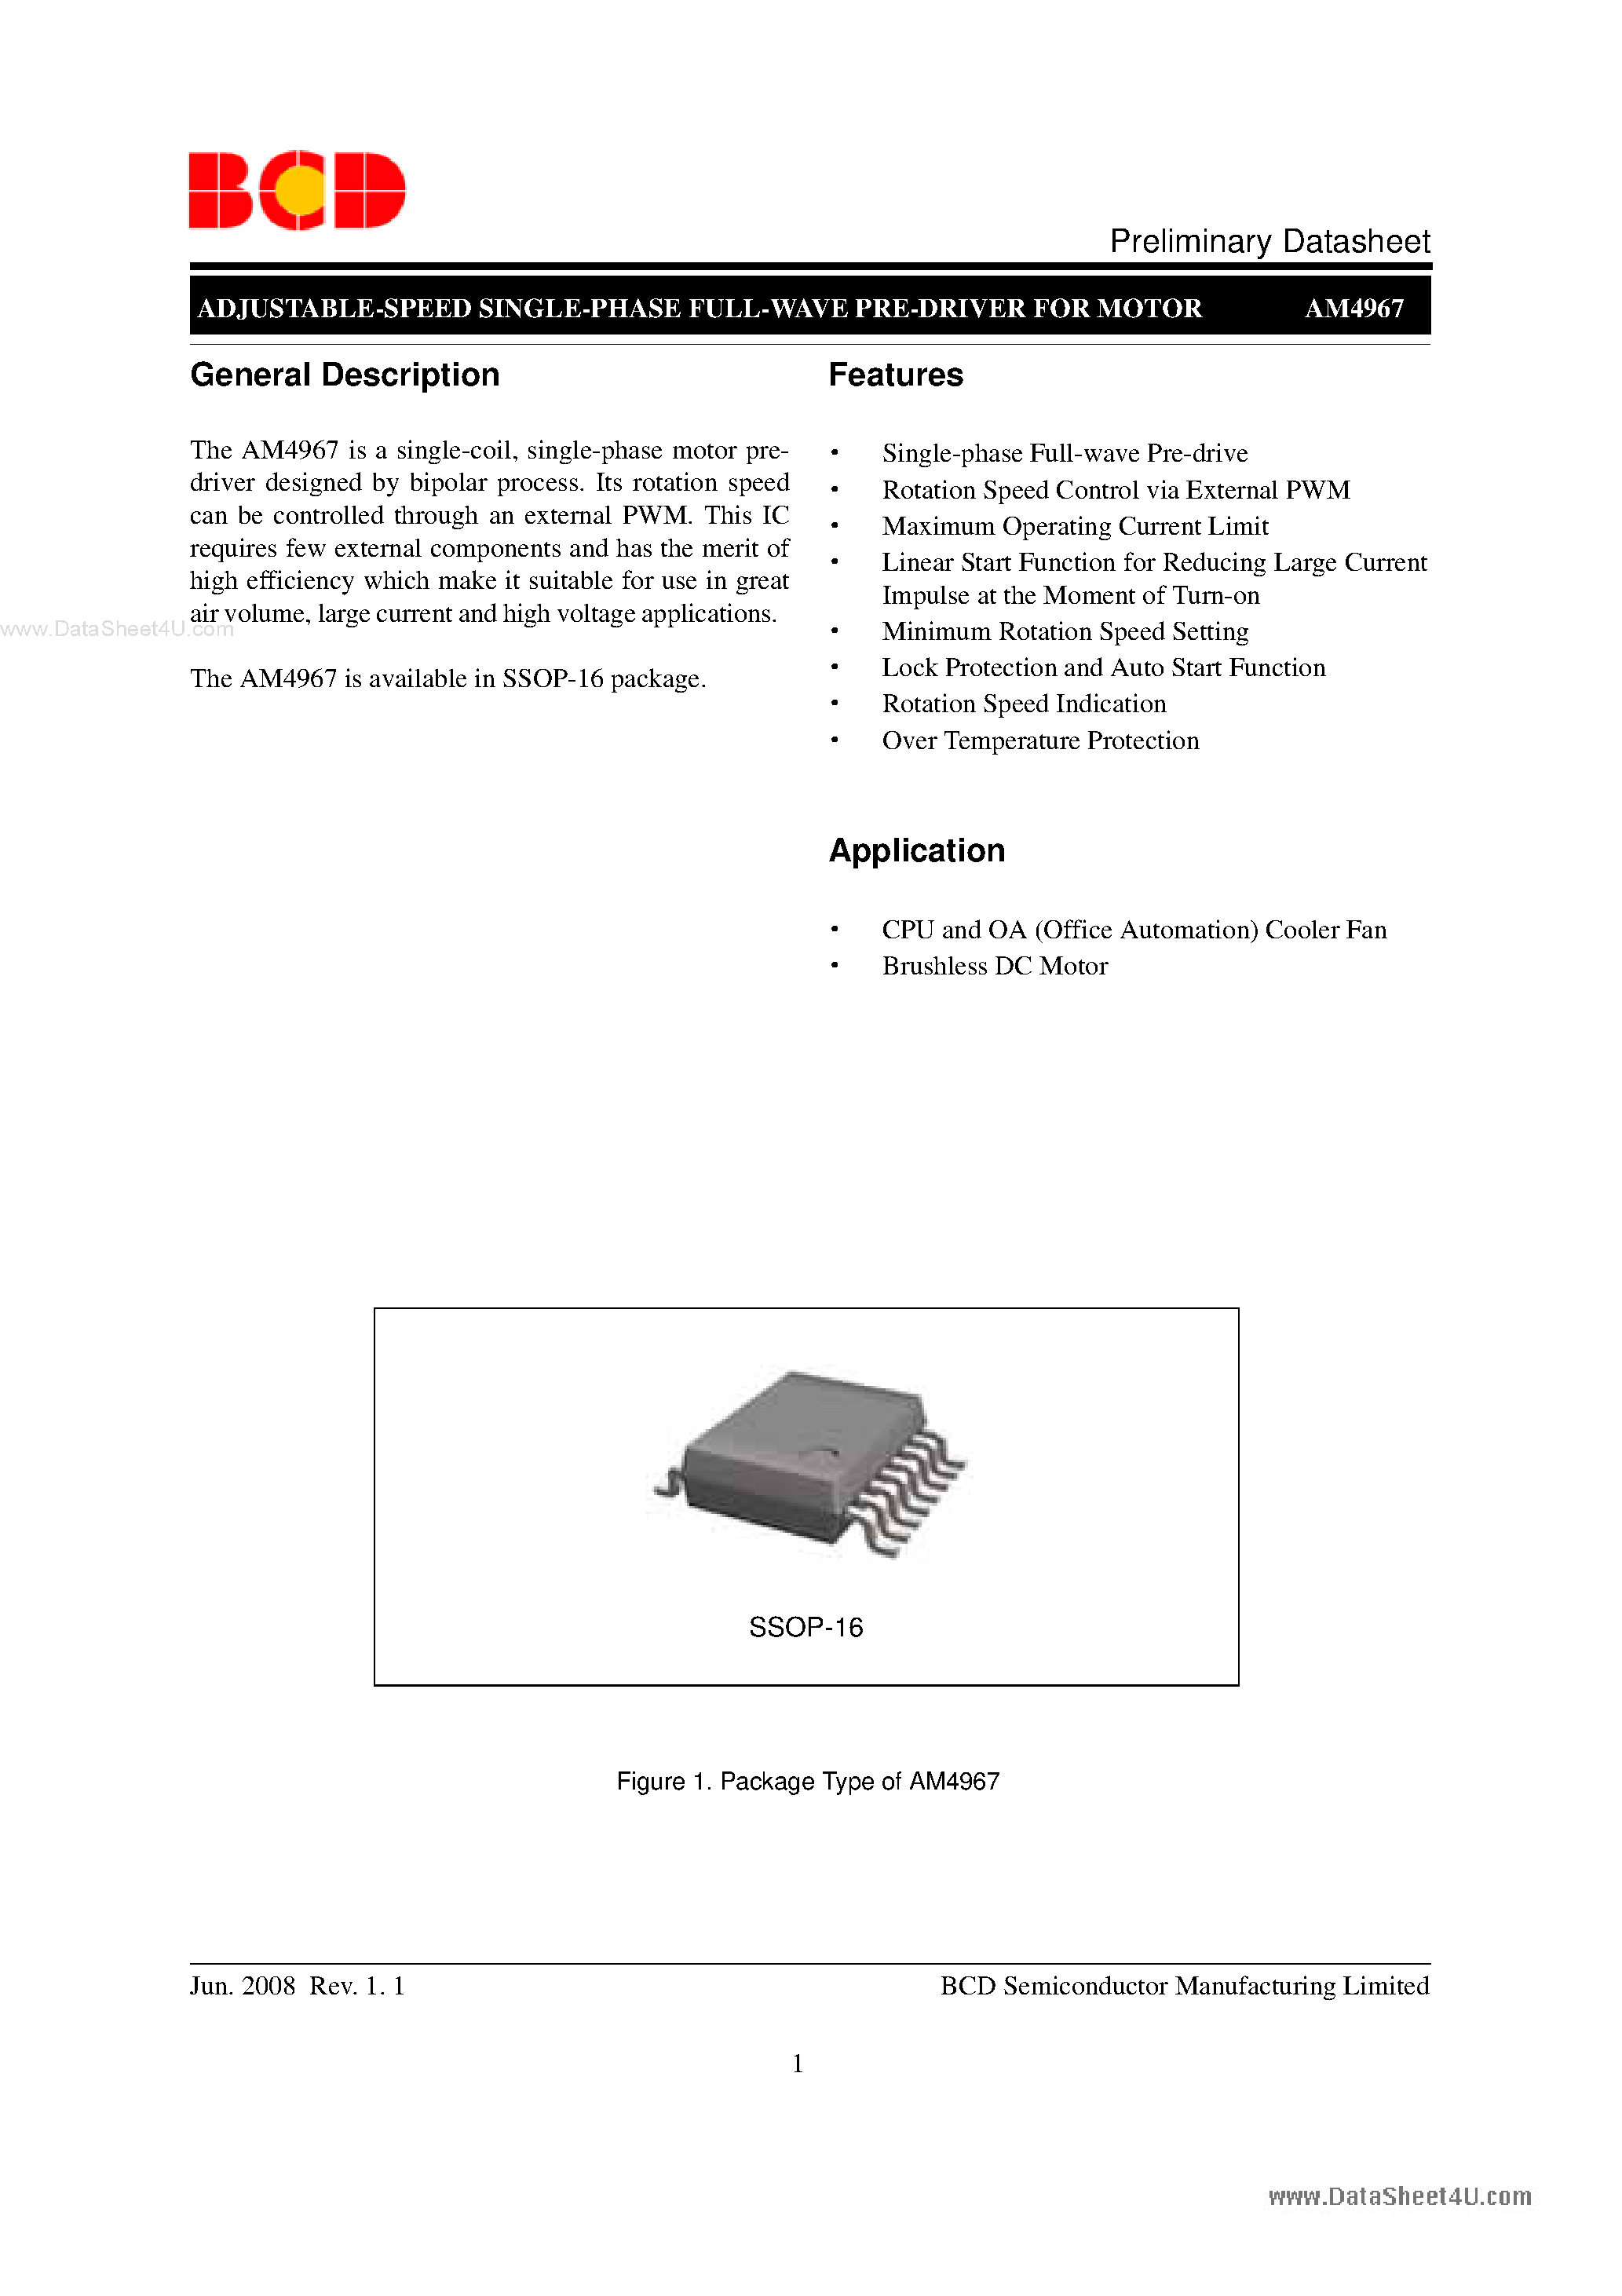 Datasheet AM4967 - ADJUSTABLE-SPEED SINGLE-PHASE FULL-WAVE PRE-DRIVER page 1